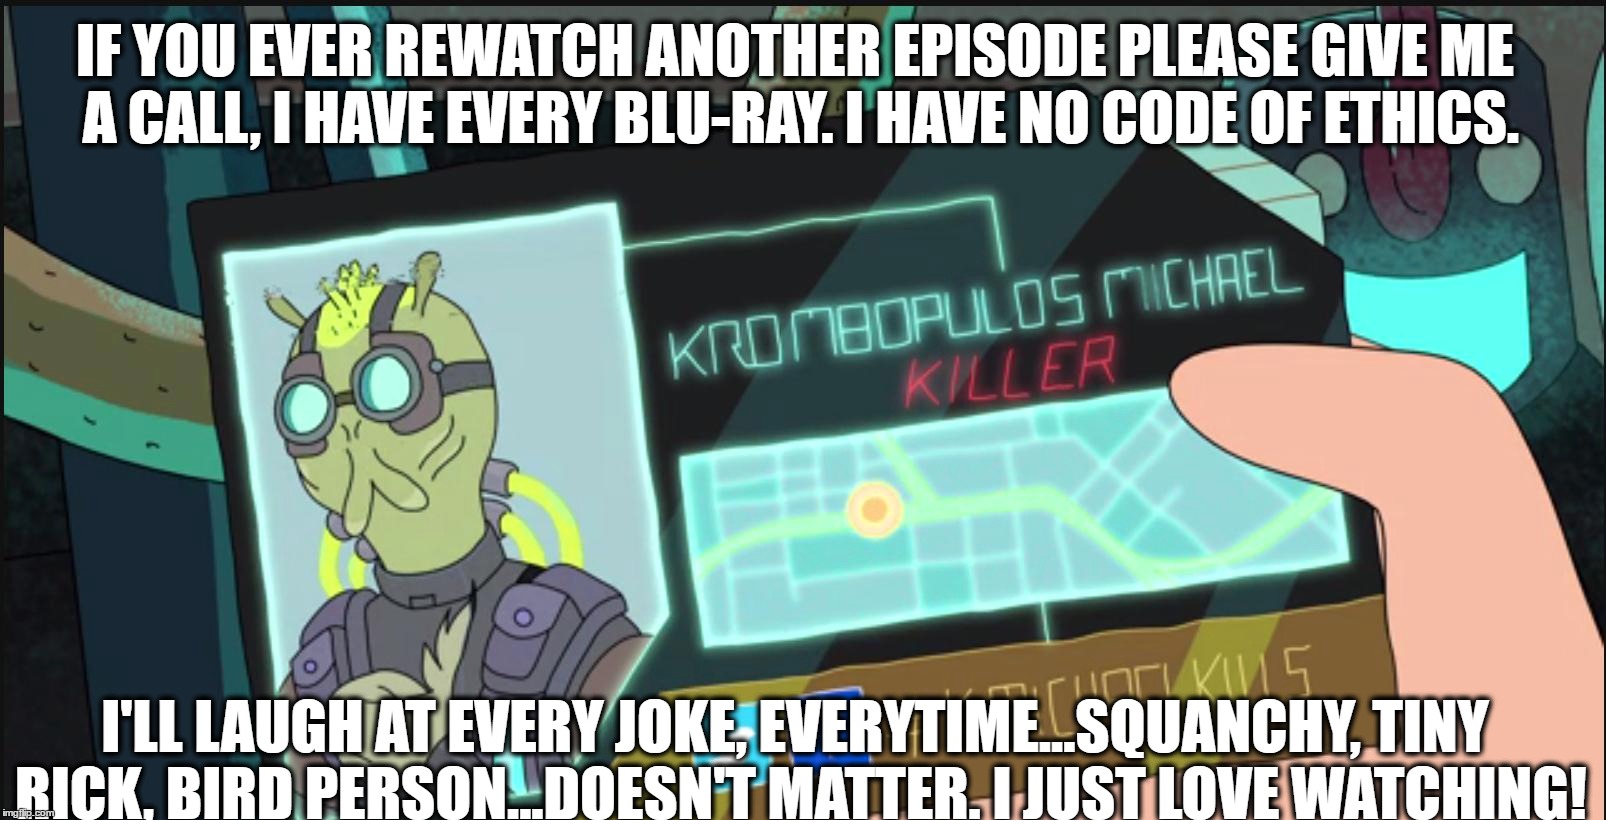 Here I Go Watching Again | IF YOU EVER REWATCH ANOTHER EPISODE PLEASE GIVE ME A CALL, I HAVE EVERY BLU-RAY. I HAVE NO CODE OF ETHICS. I'LL LAUGH AT EVERY JOKE, EVERYTIME...SQUANCHY, TINY RICK, BIRD PERSON...DOESN'T MATTER. I JUST LOVE WATCHING! | image tagged in rick and morty,y'all got any more of them game of thrones episodes,humor,oh boy,binge watching | made w/ Imgflip meme maker